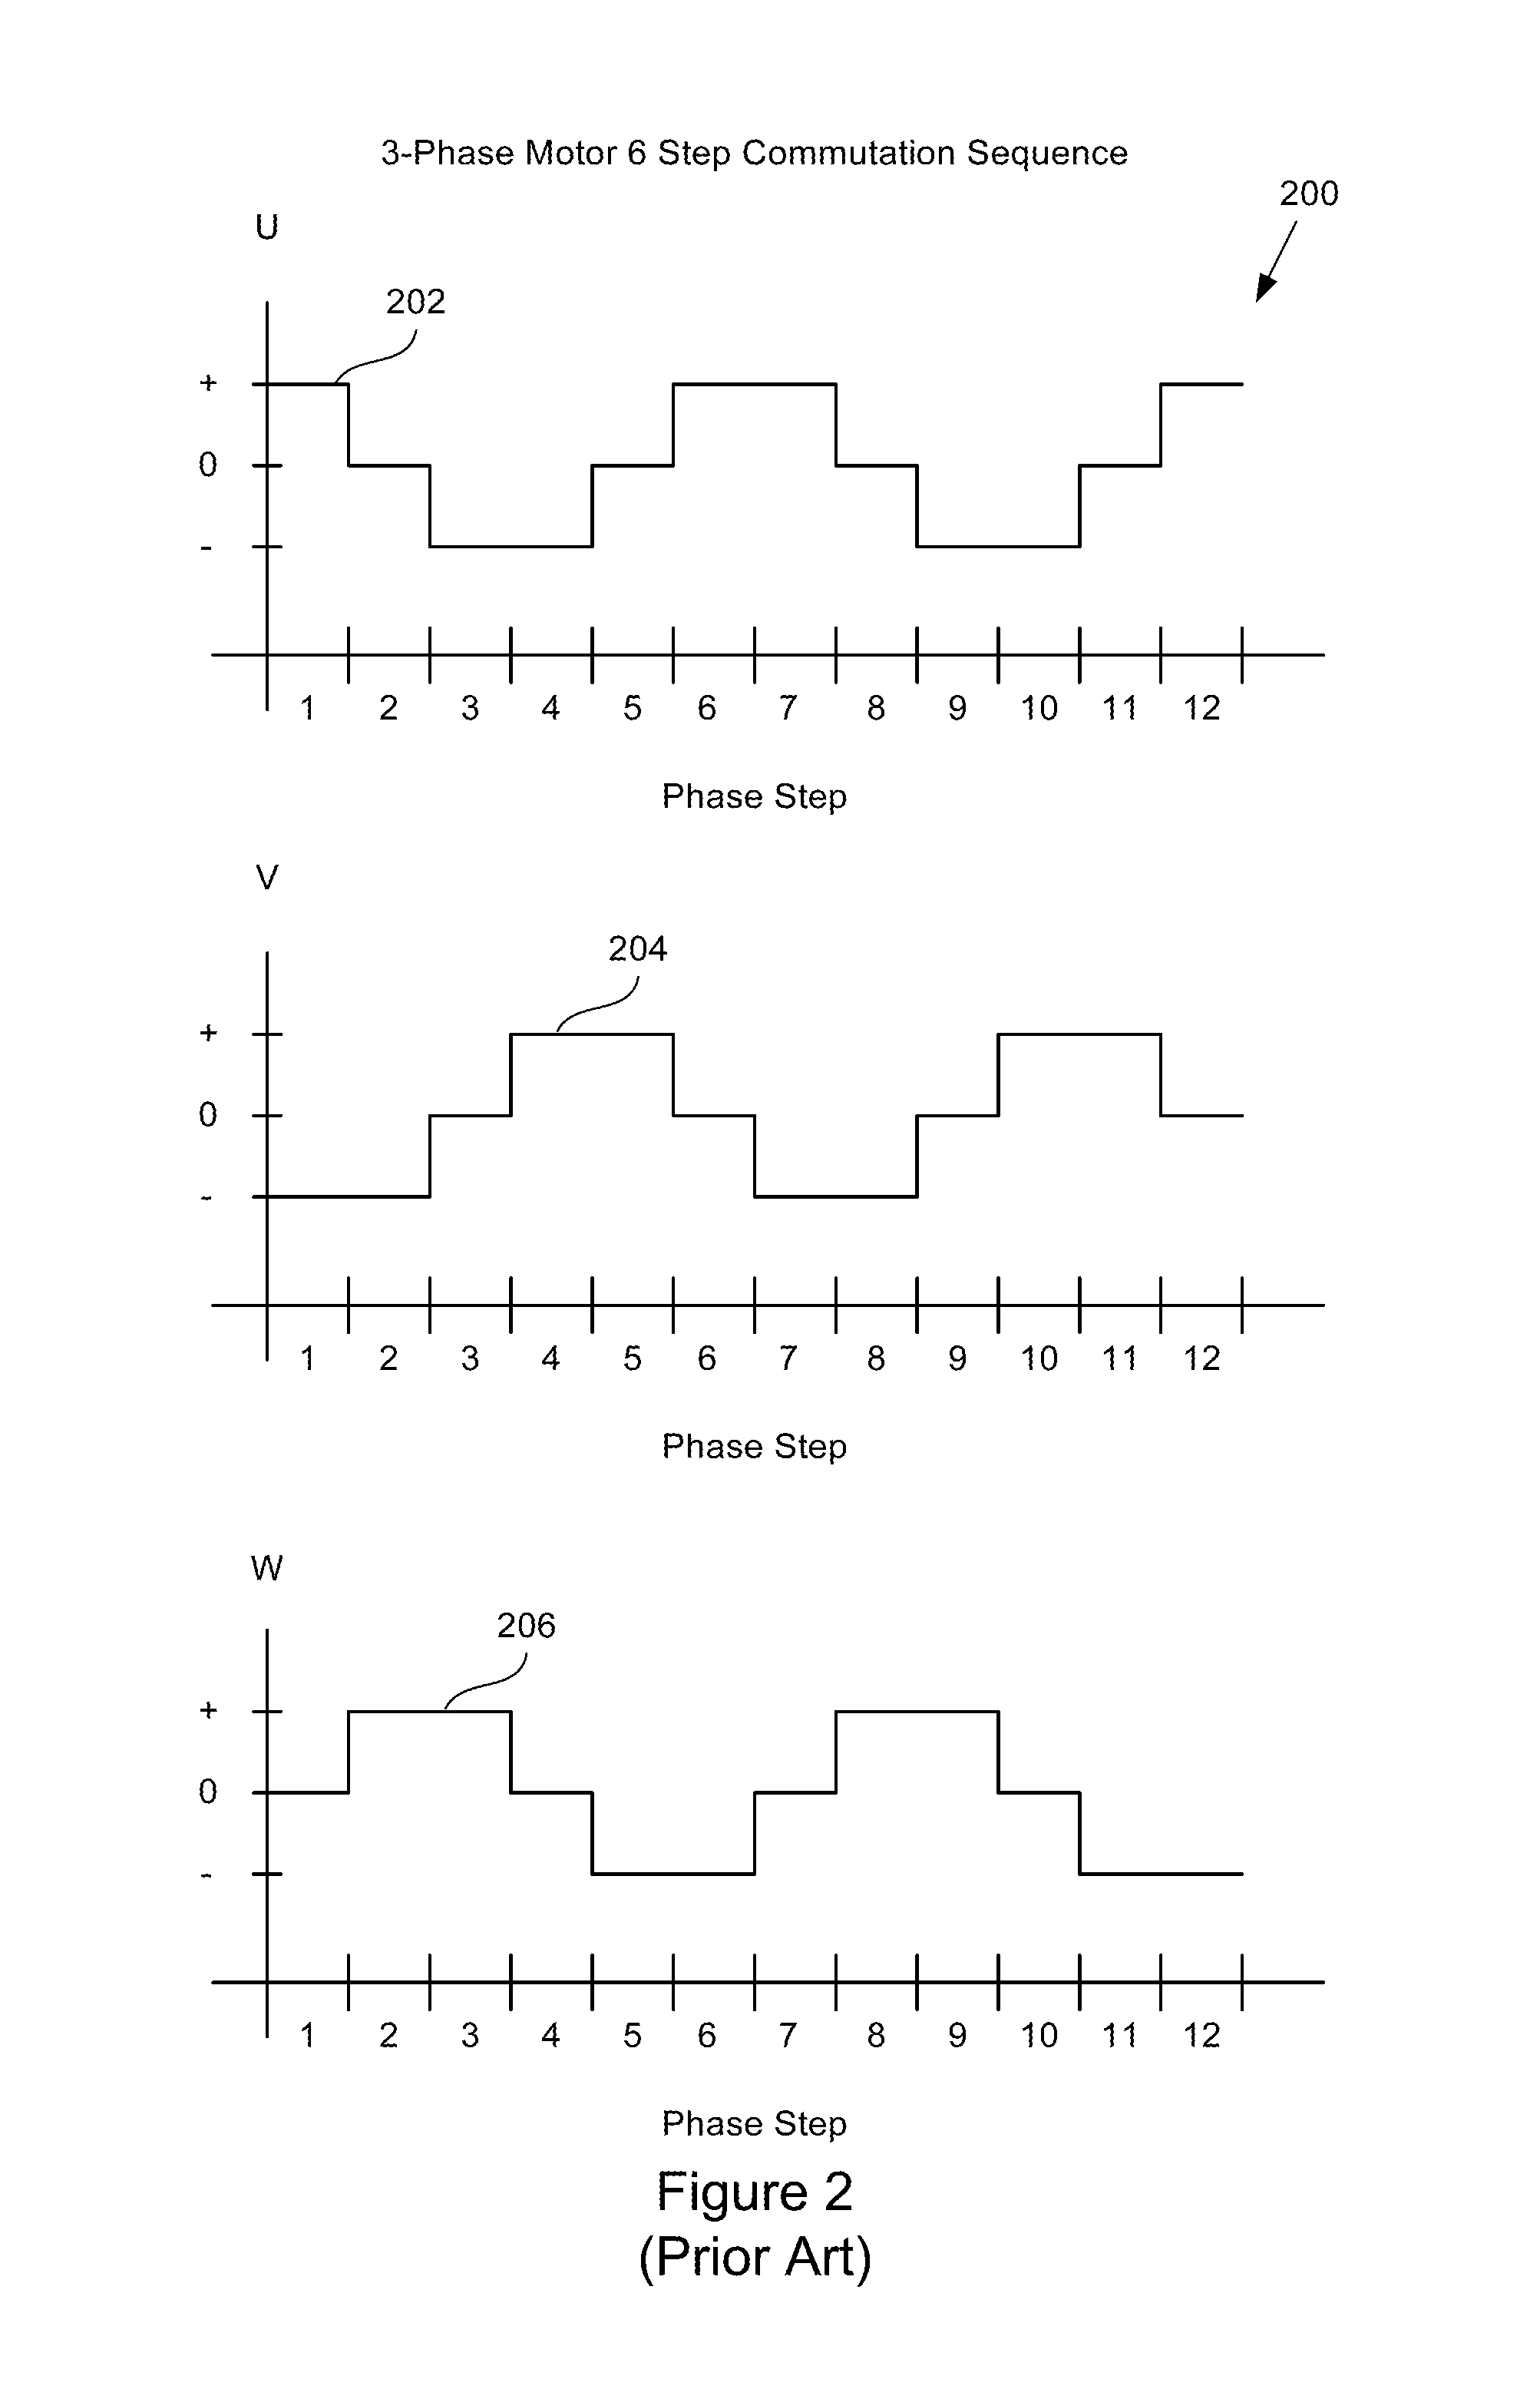 Reducing tonal excitations in a computer system